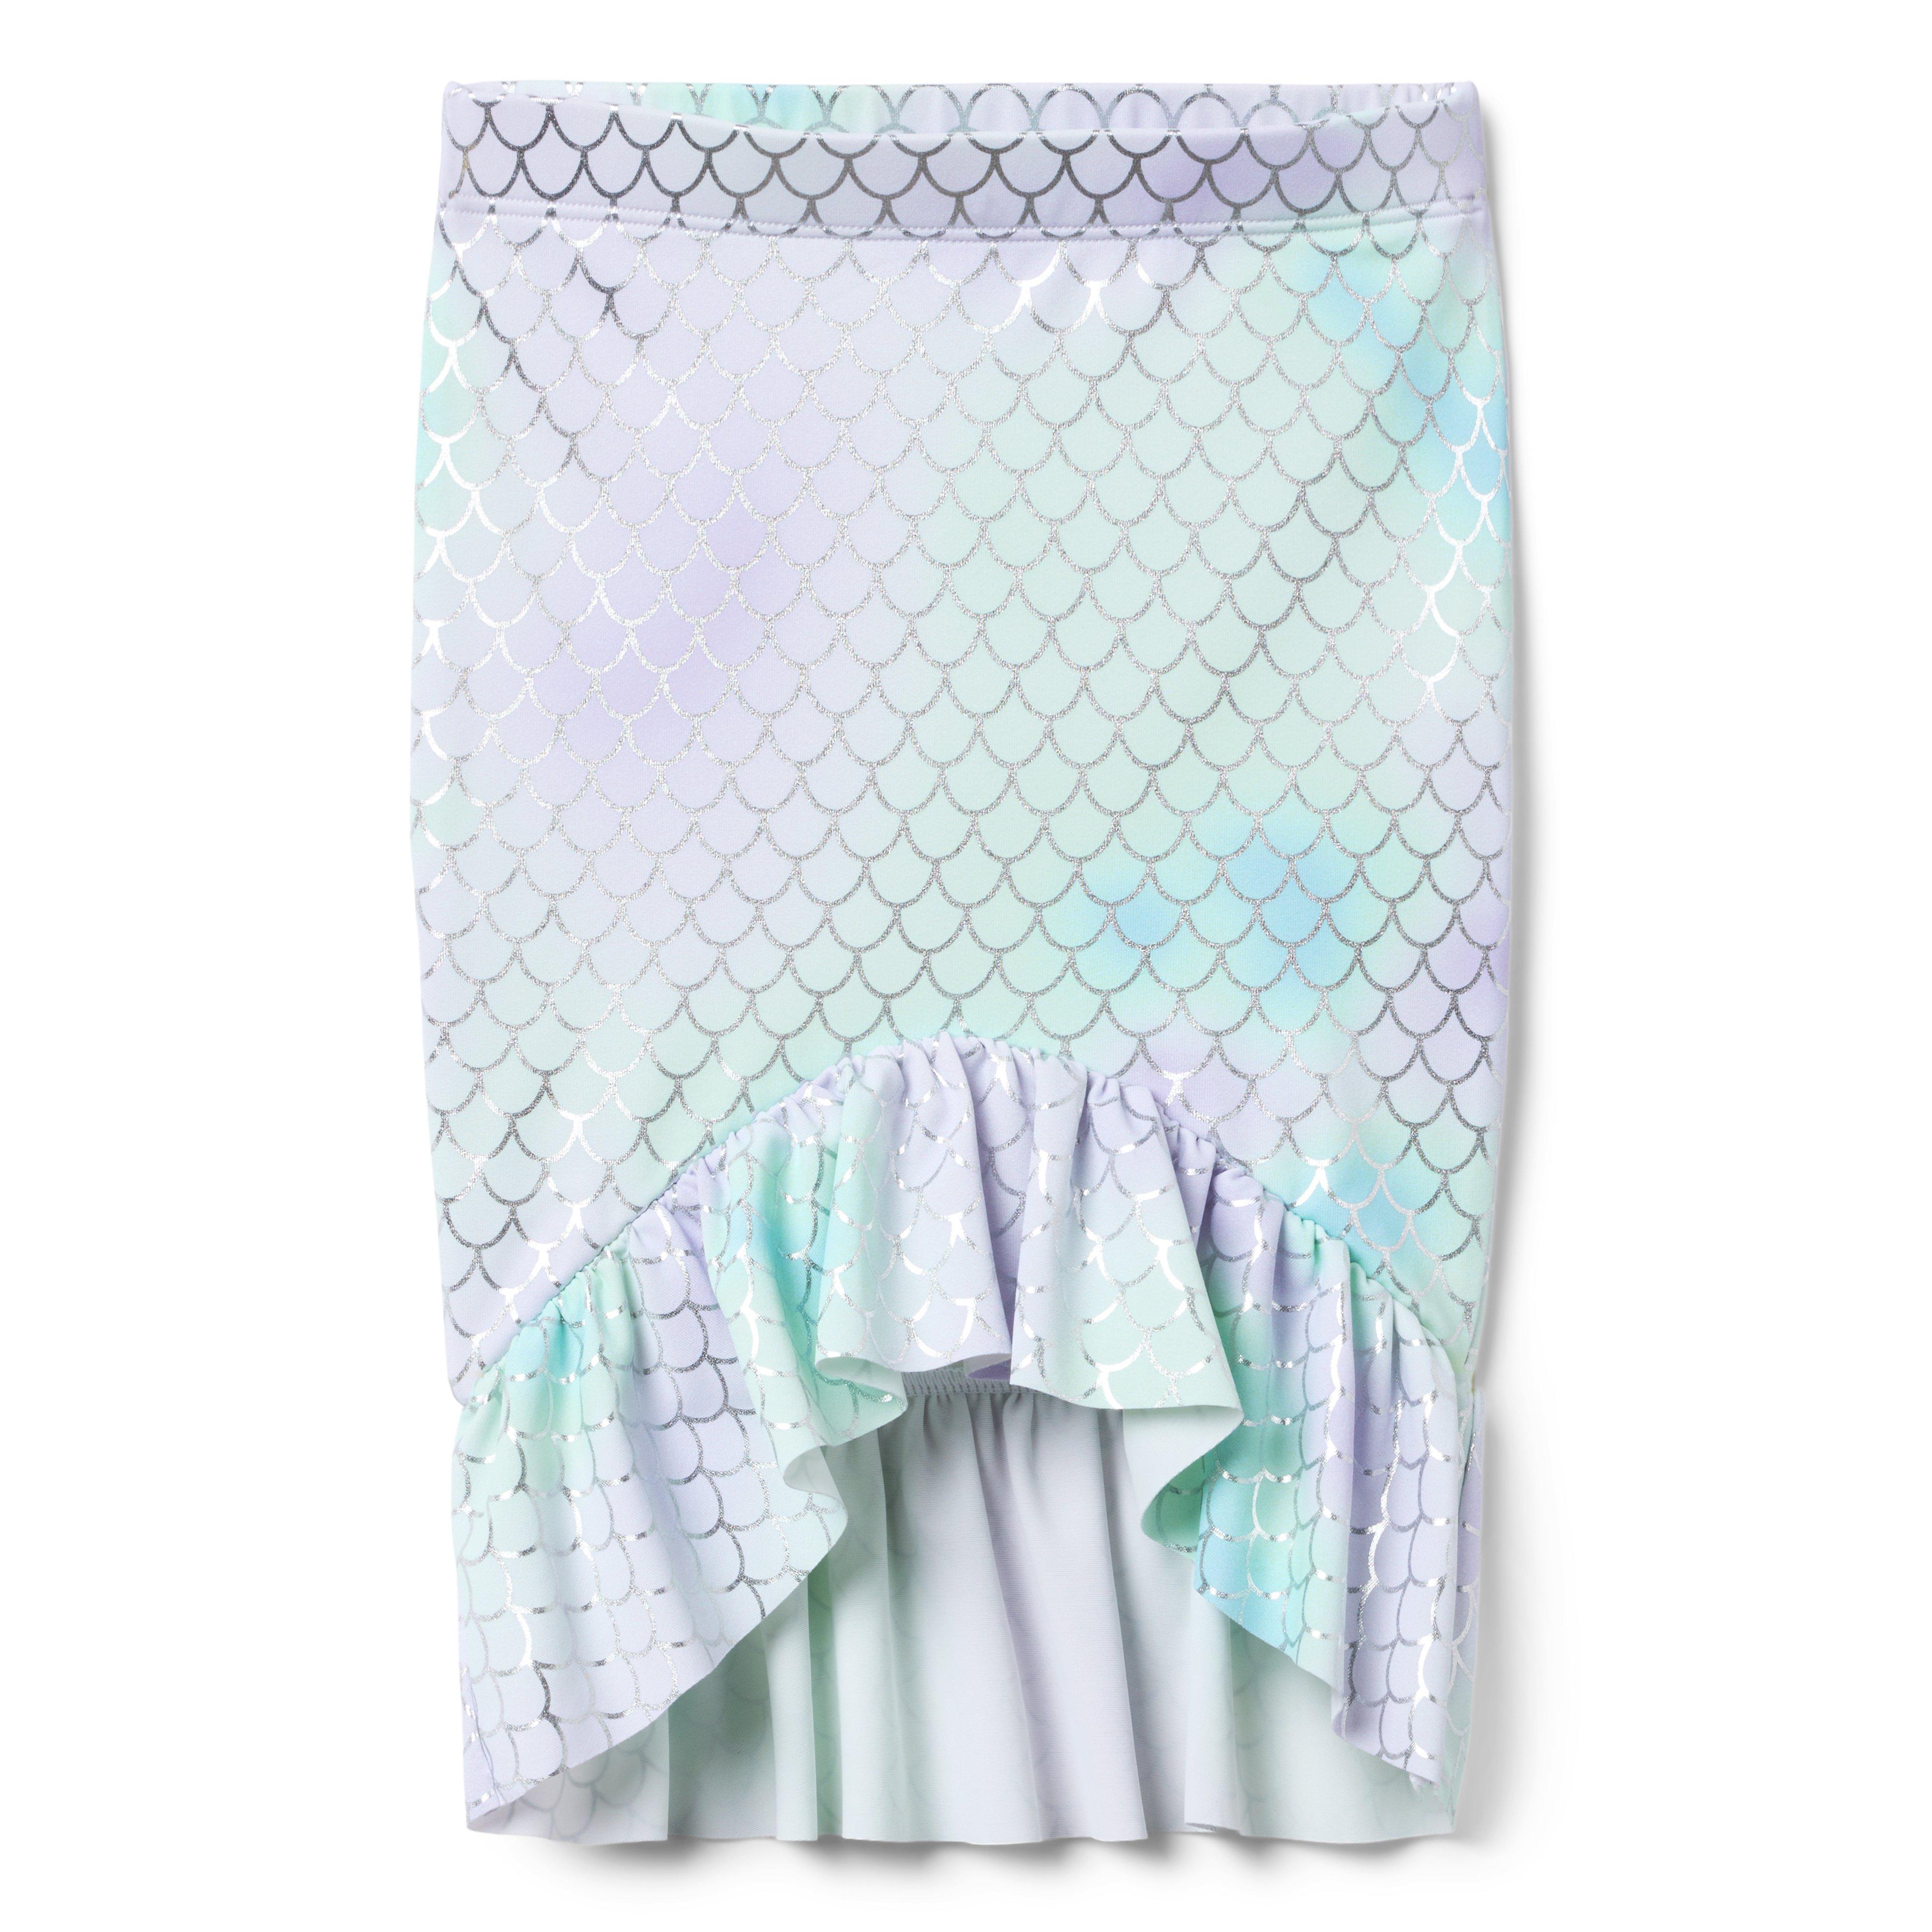 Recycled Mermaid Tail Skirt Cover-Up